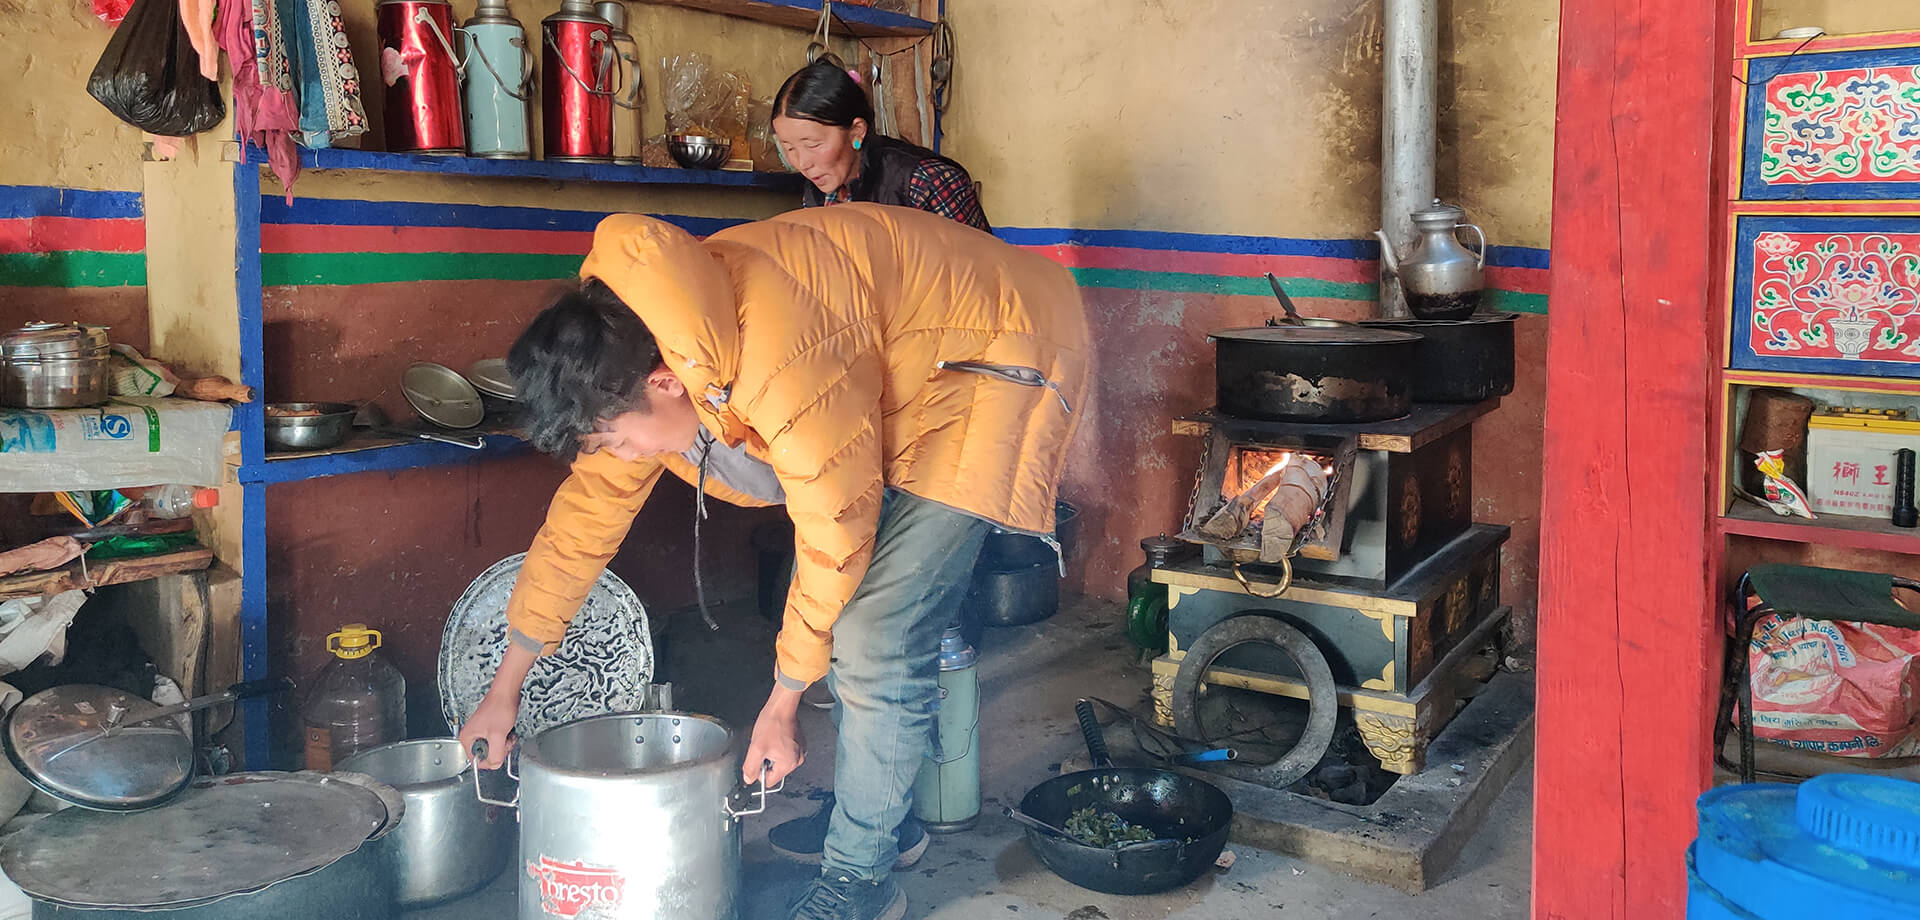 Shopkeepers cooking local cuisine on open stoves